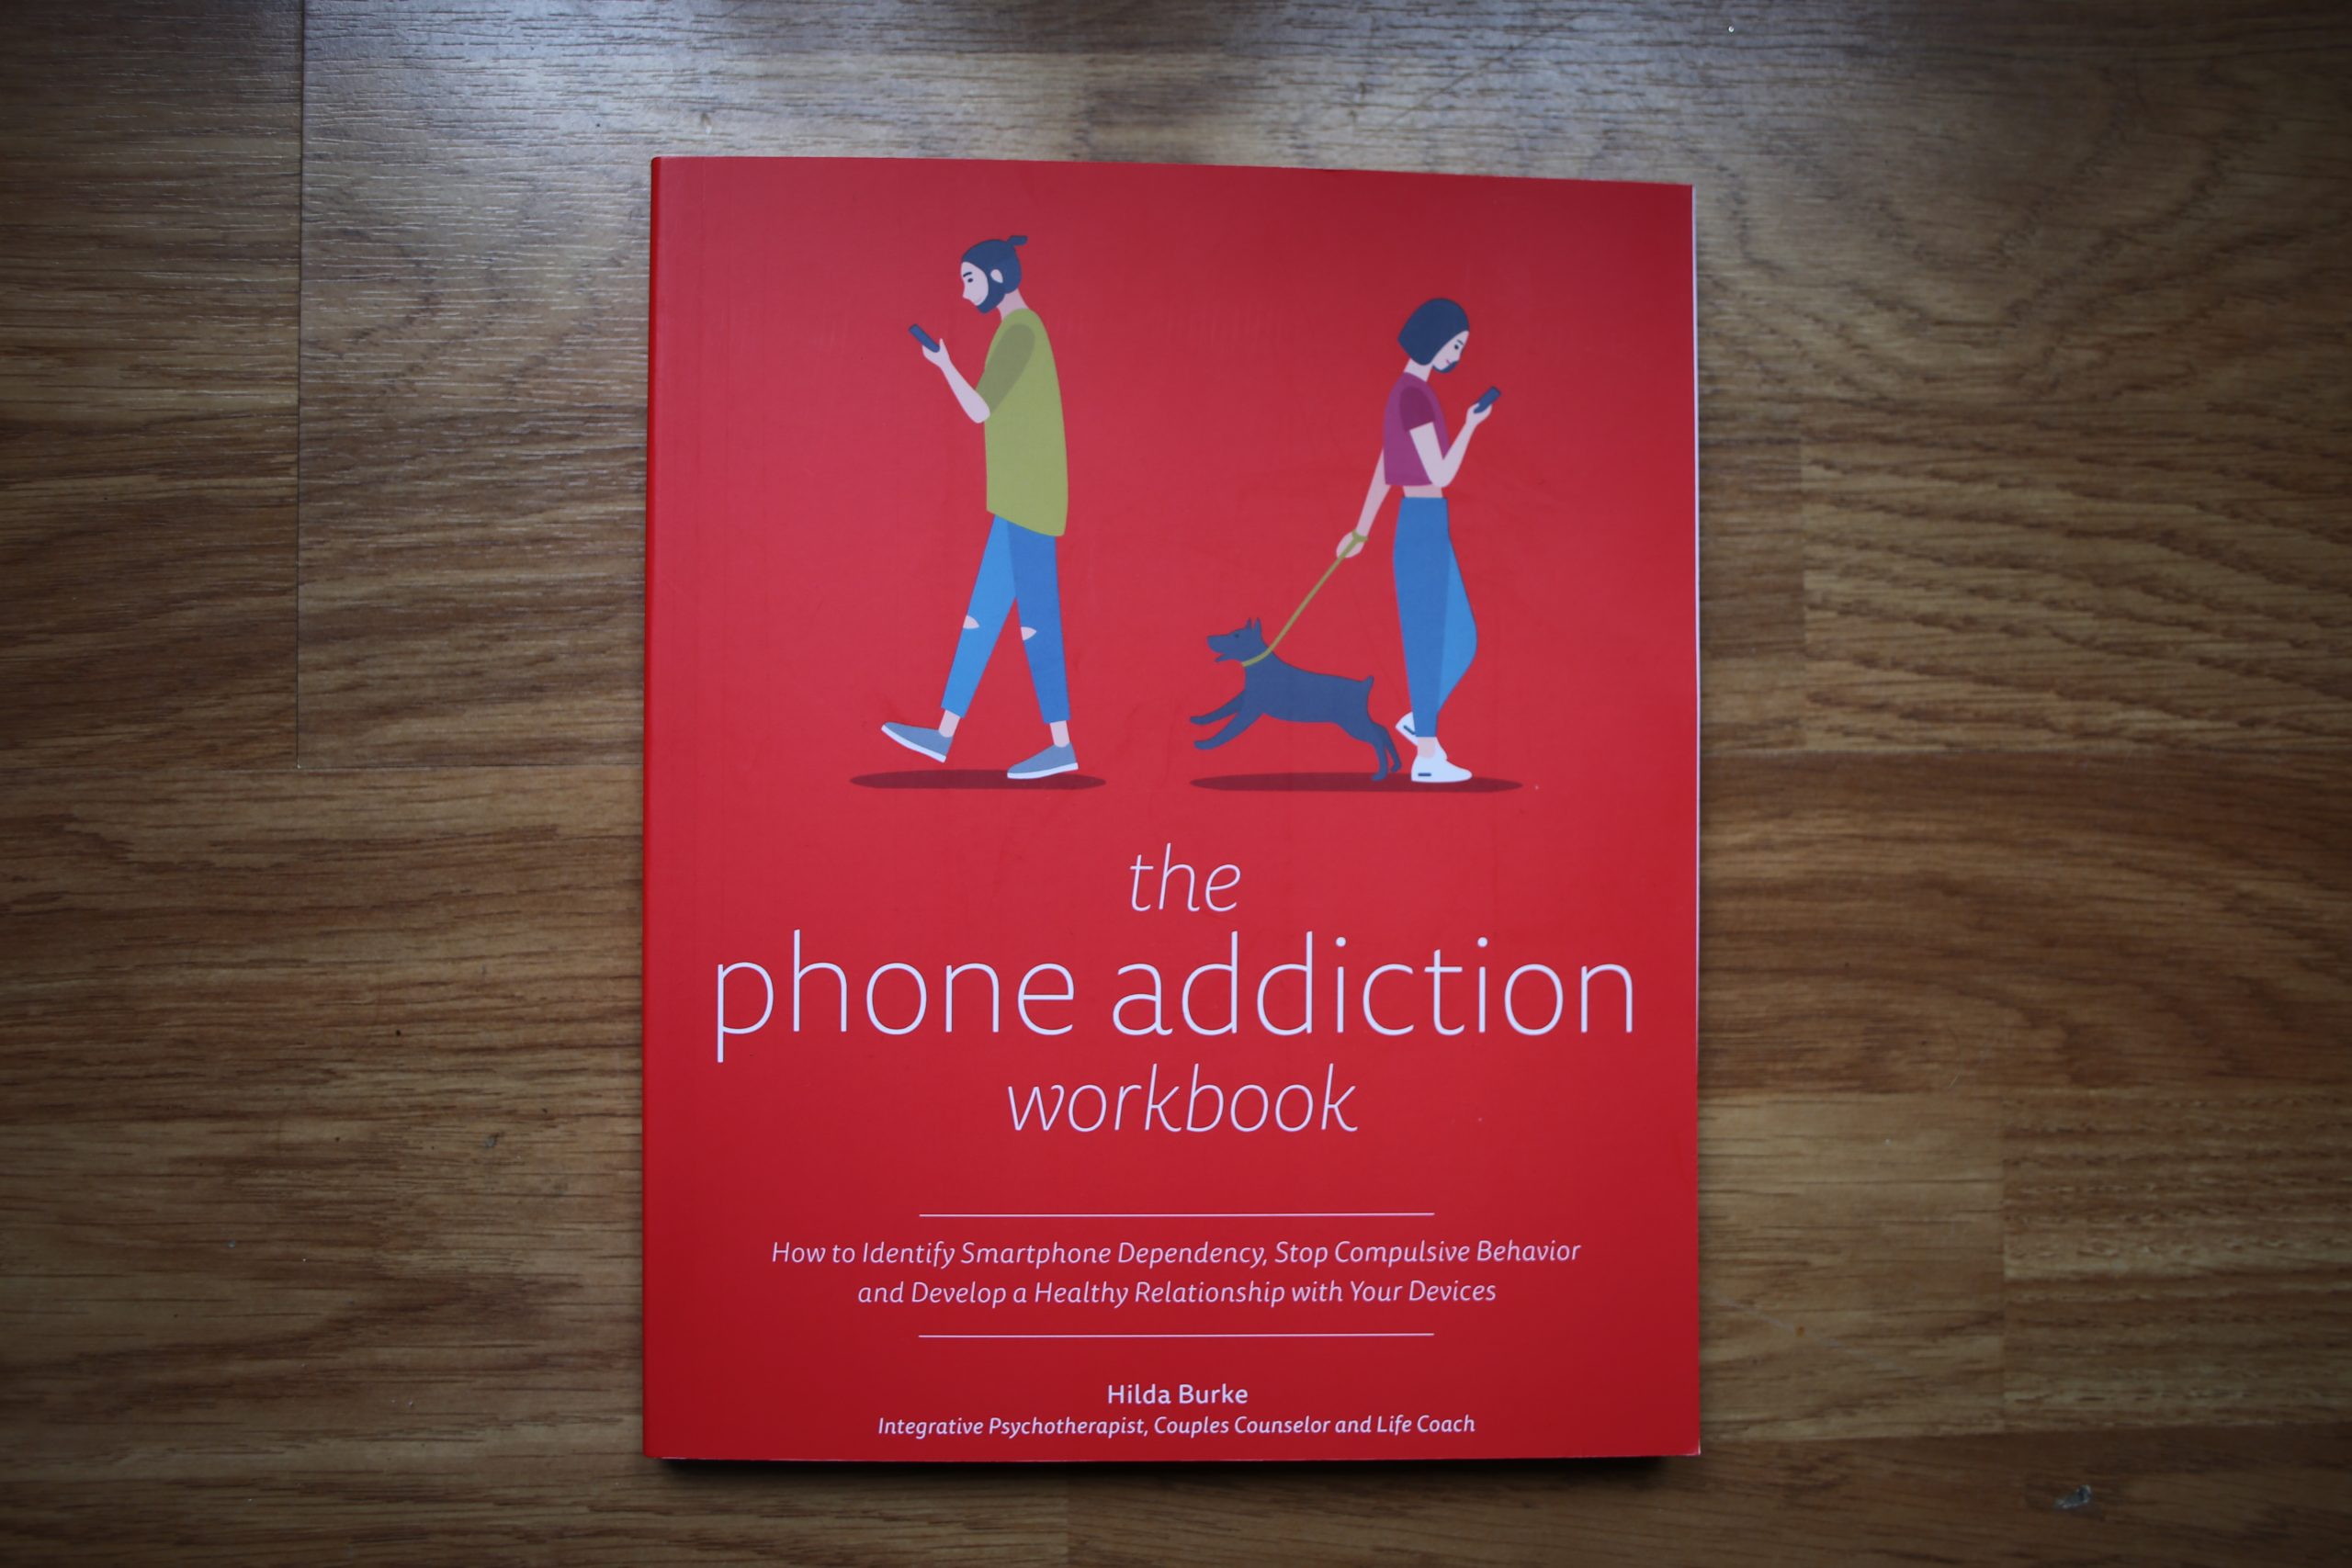 Photo shows book the phone addiction workbook, which I bought because of effective content marketing